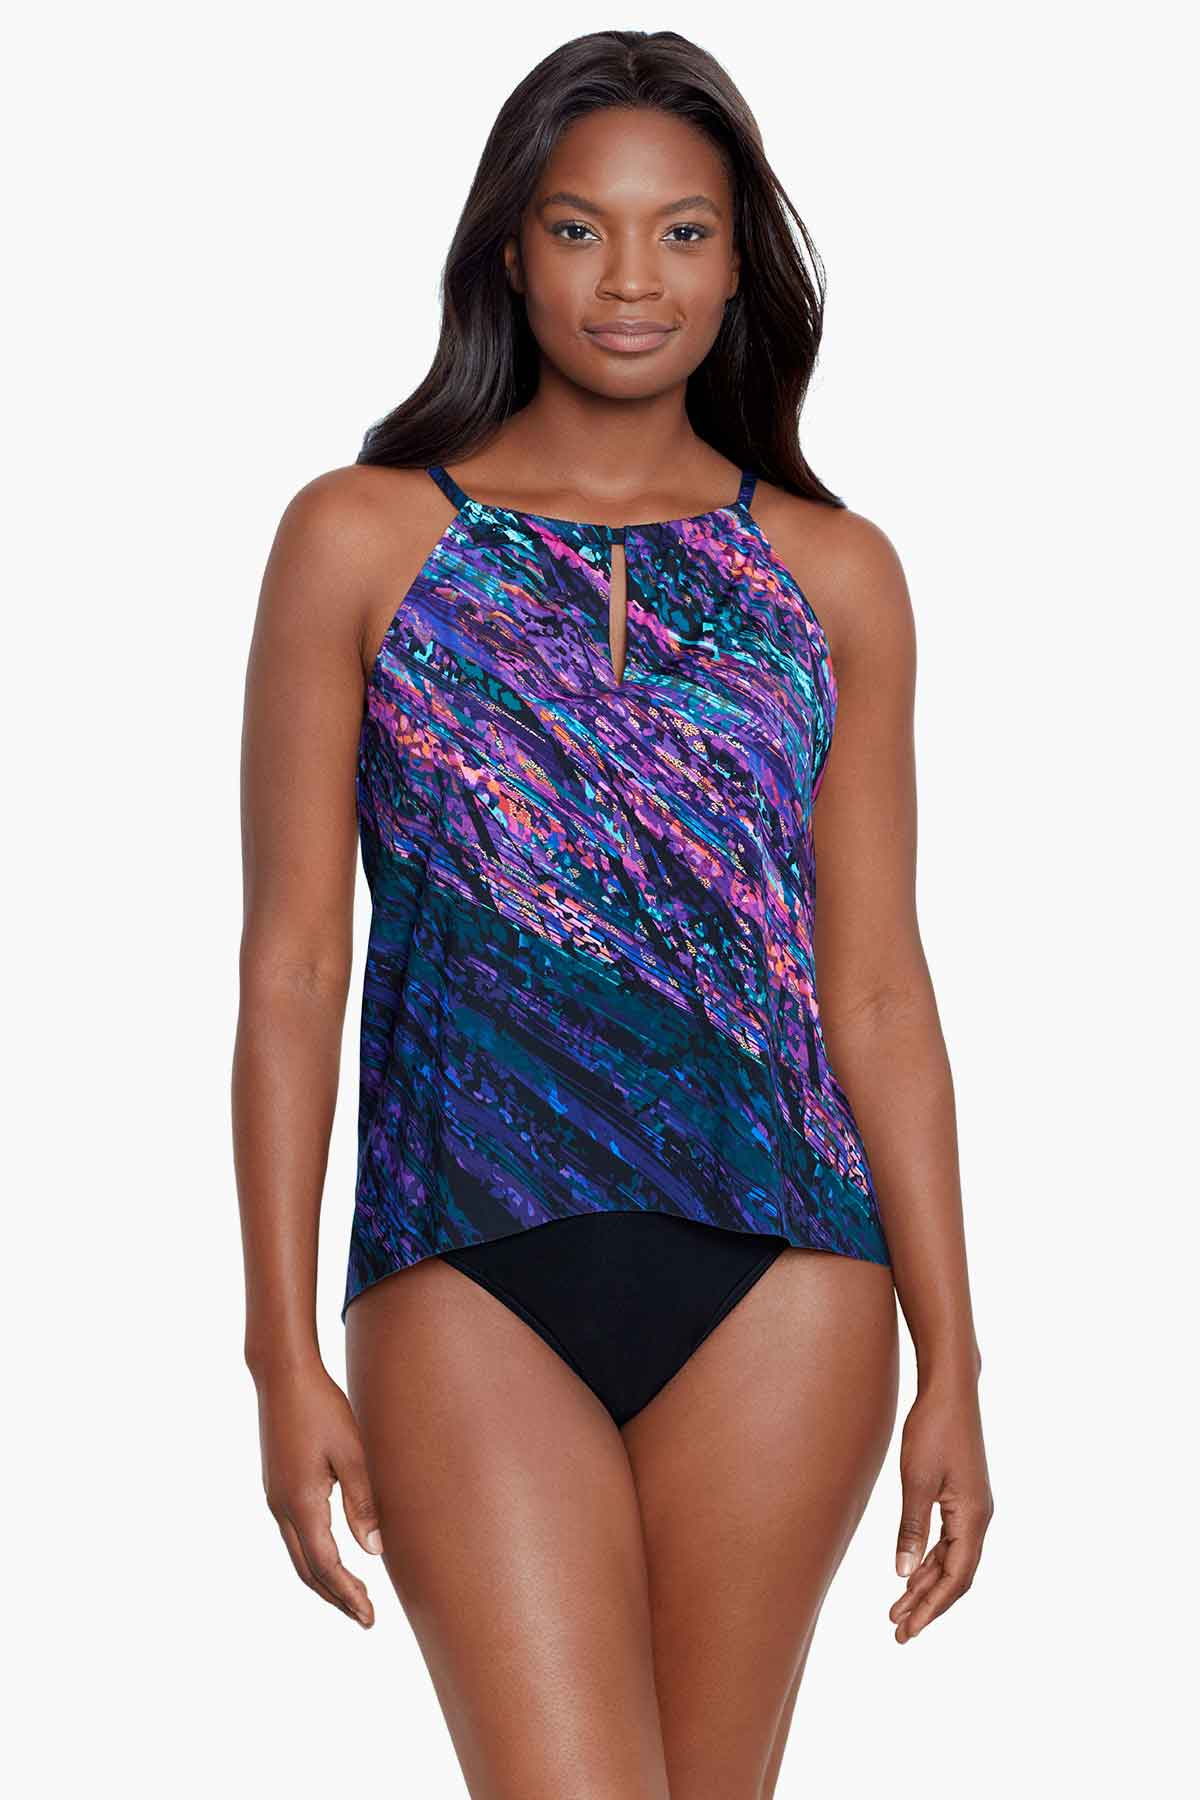  Brown High Neck Tankini Top Bathing Suit Tops For